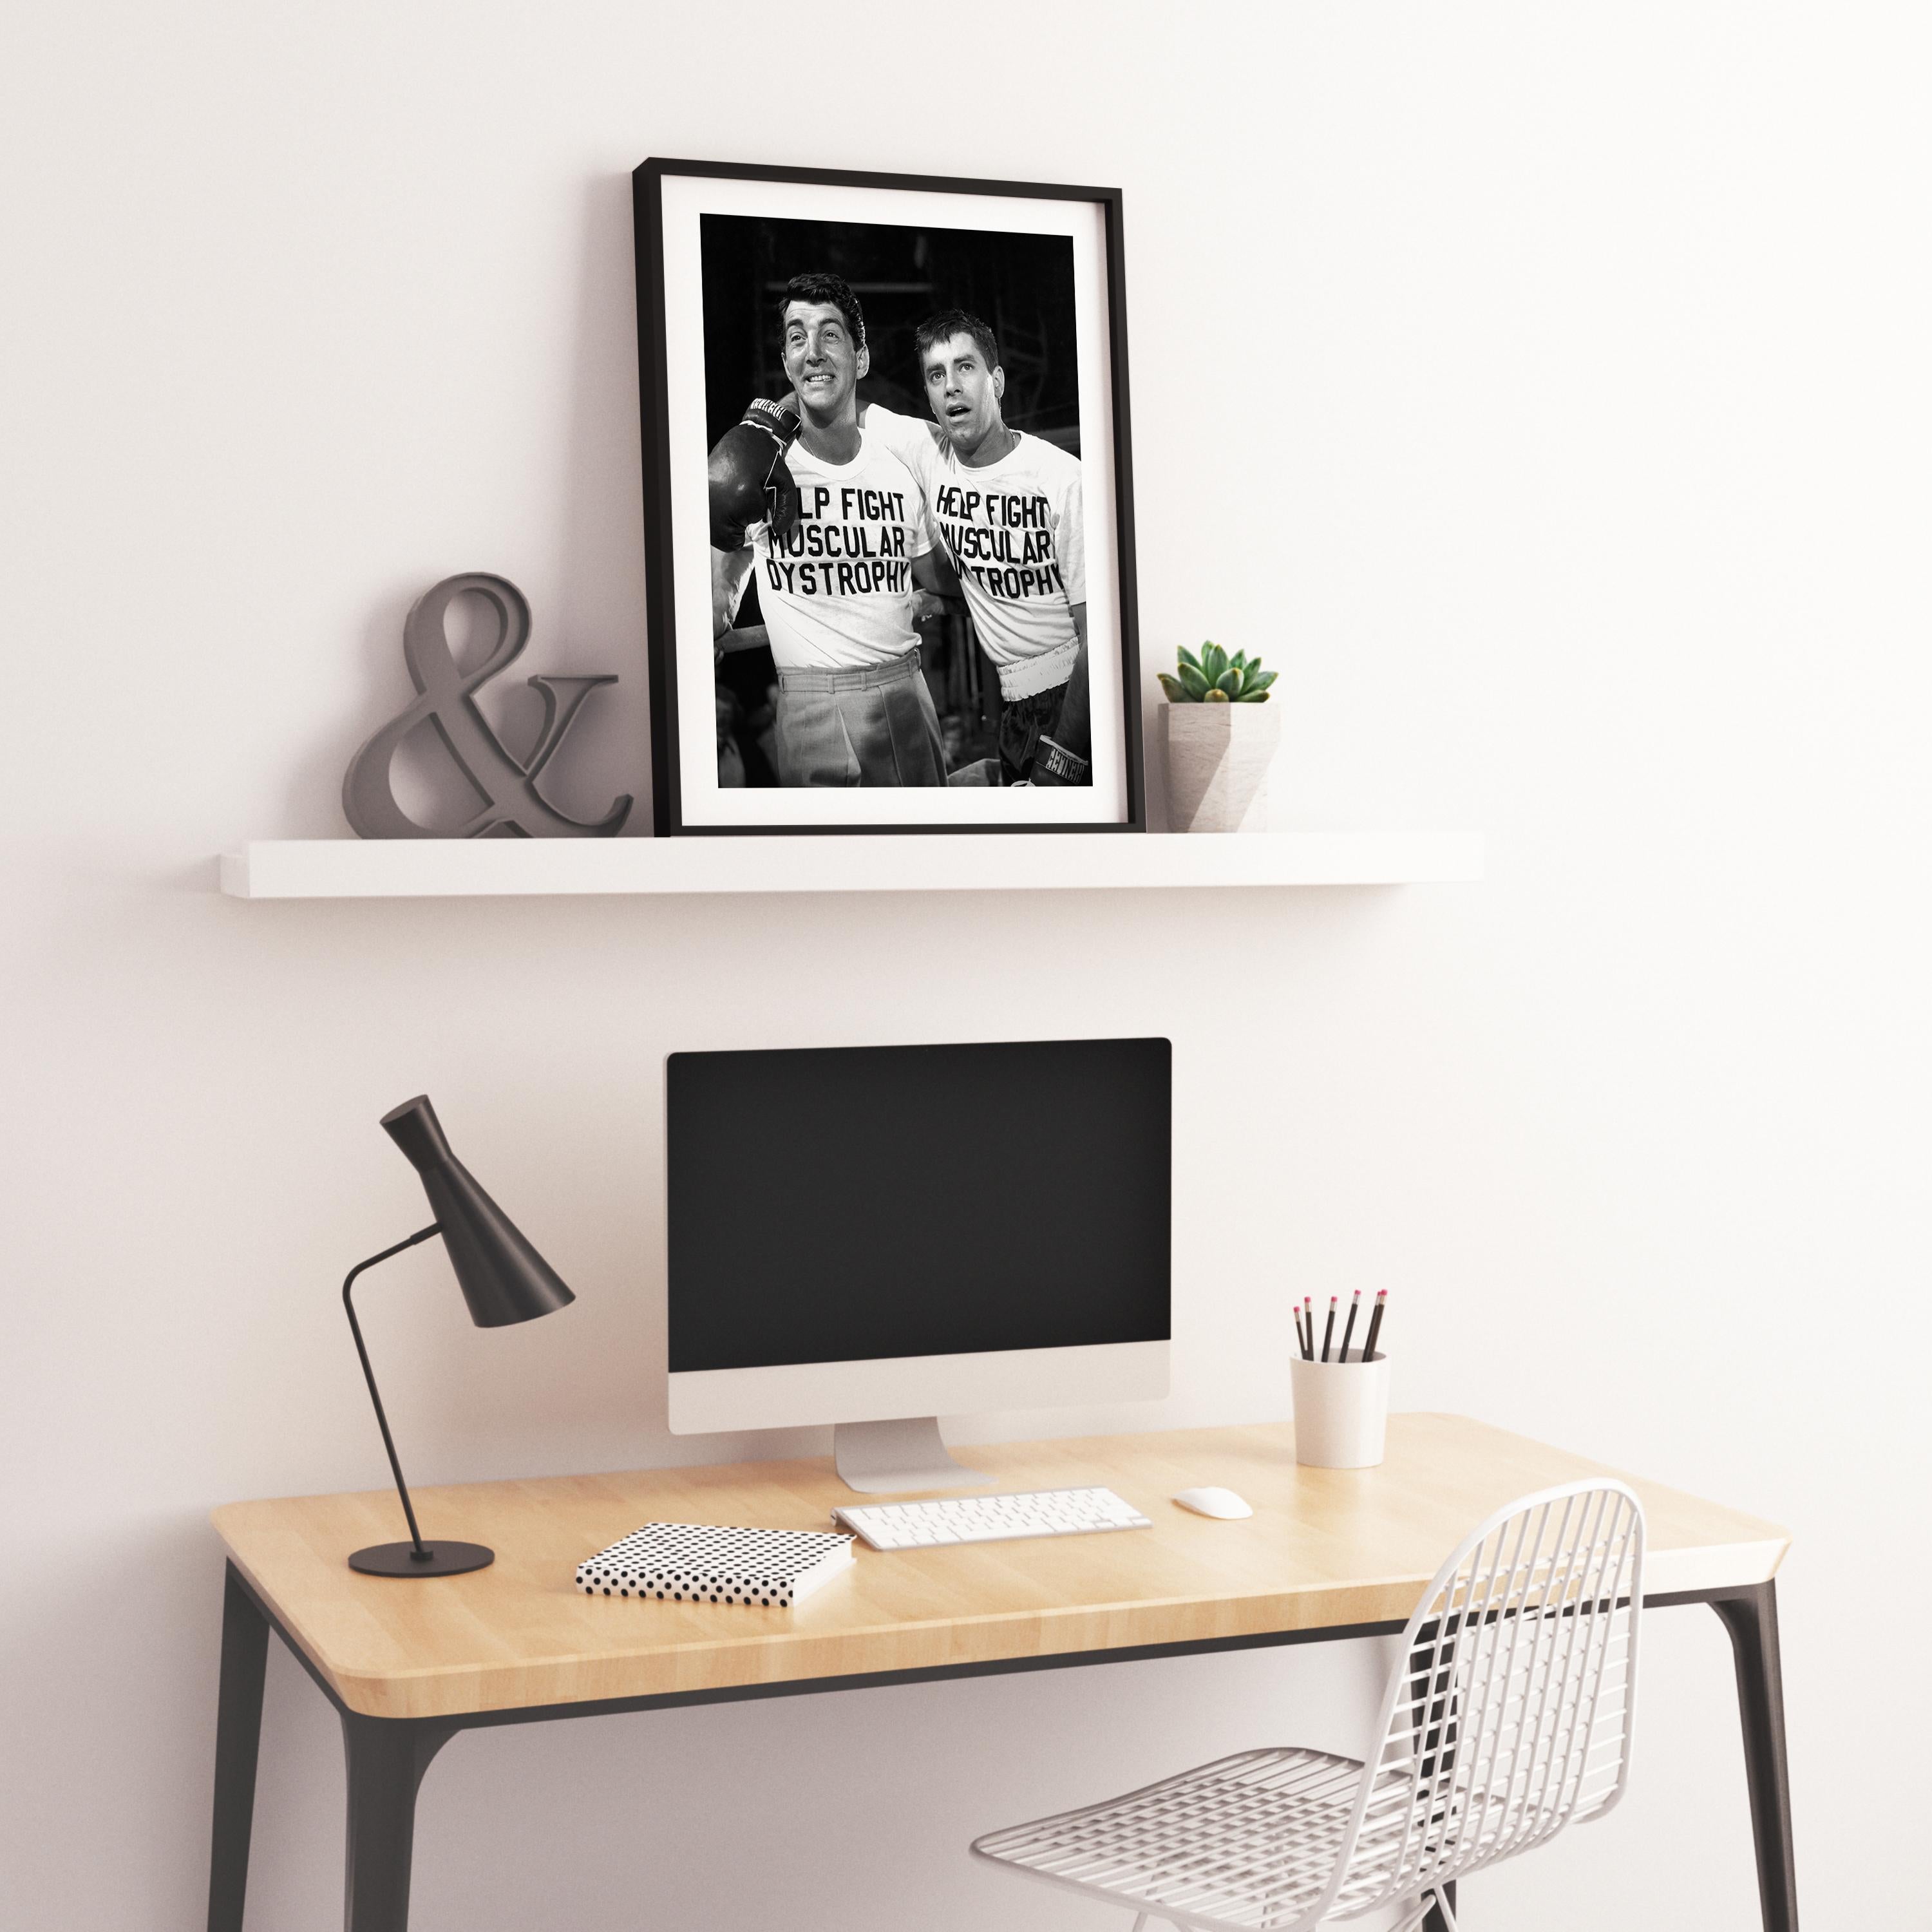 Dean Martin and Jerry Lewis Fight Muscular Dystophy Globe Photos Fine Art Print - Black Portrait Photograph by Unknown